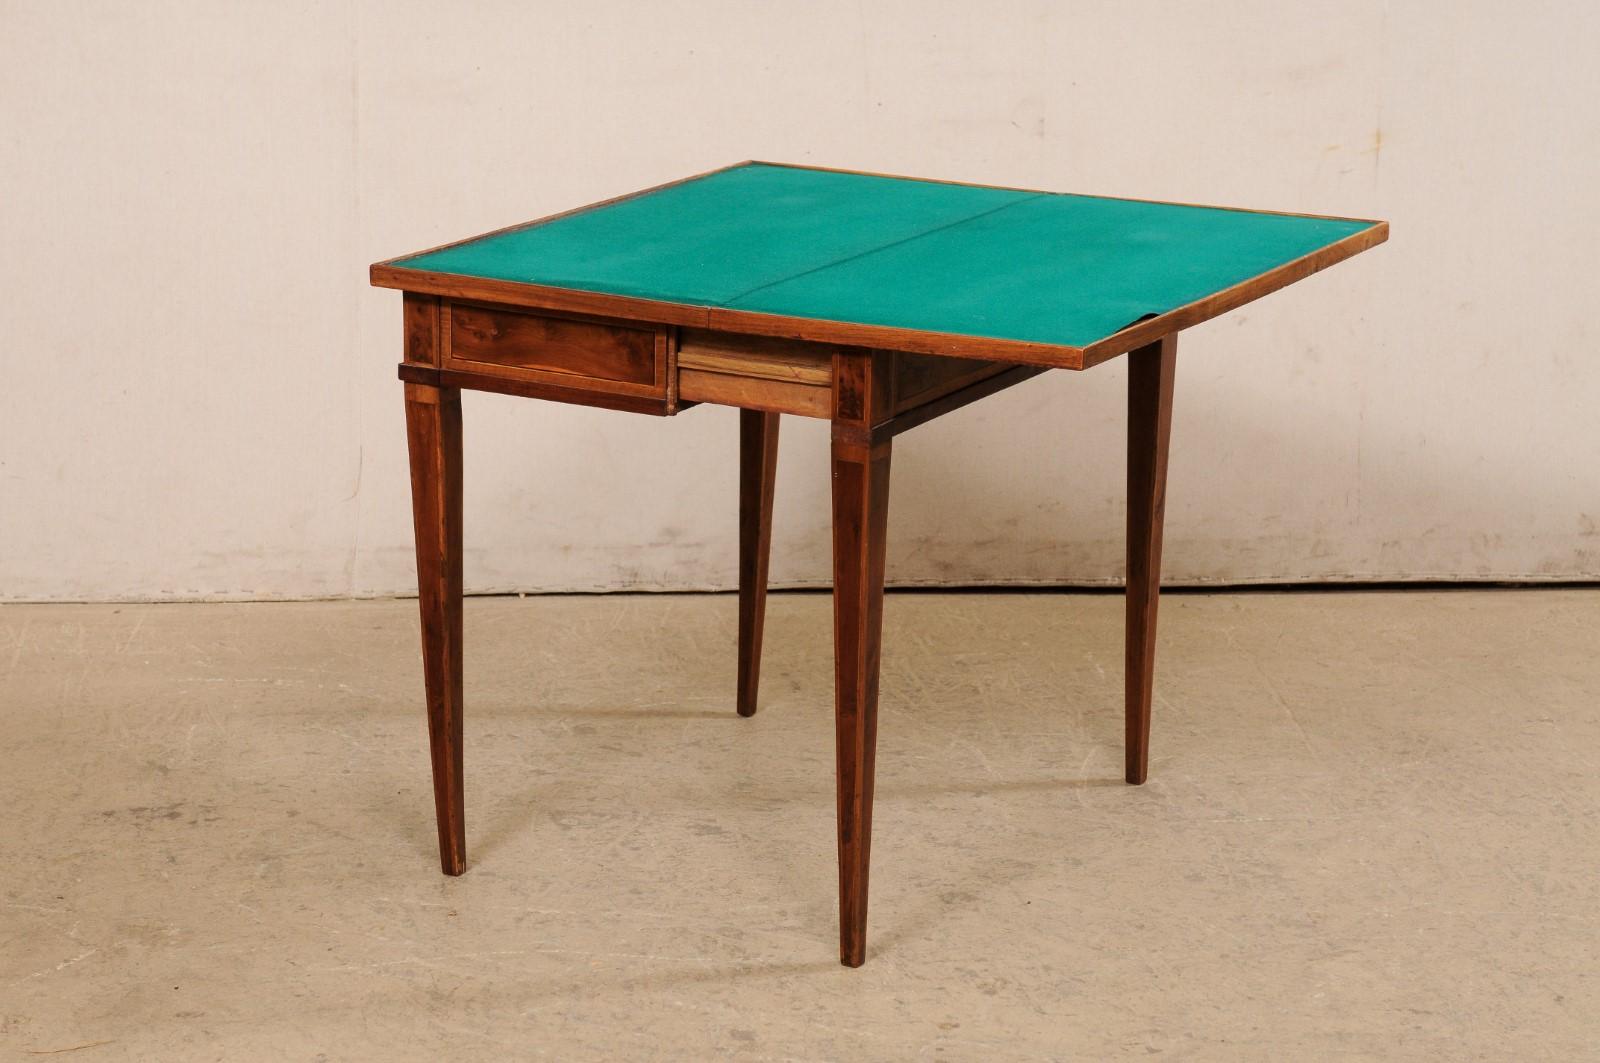 19th C. French Petite-Size Flip Top Table 'Transitional to a Card/Games Table' For Sale 4